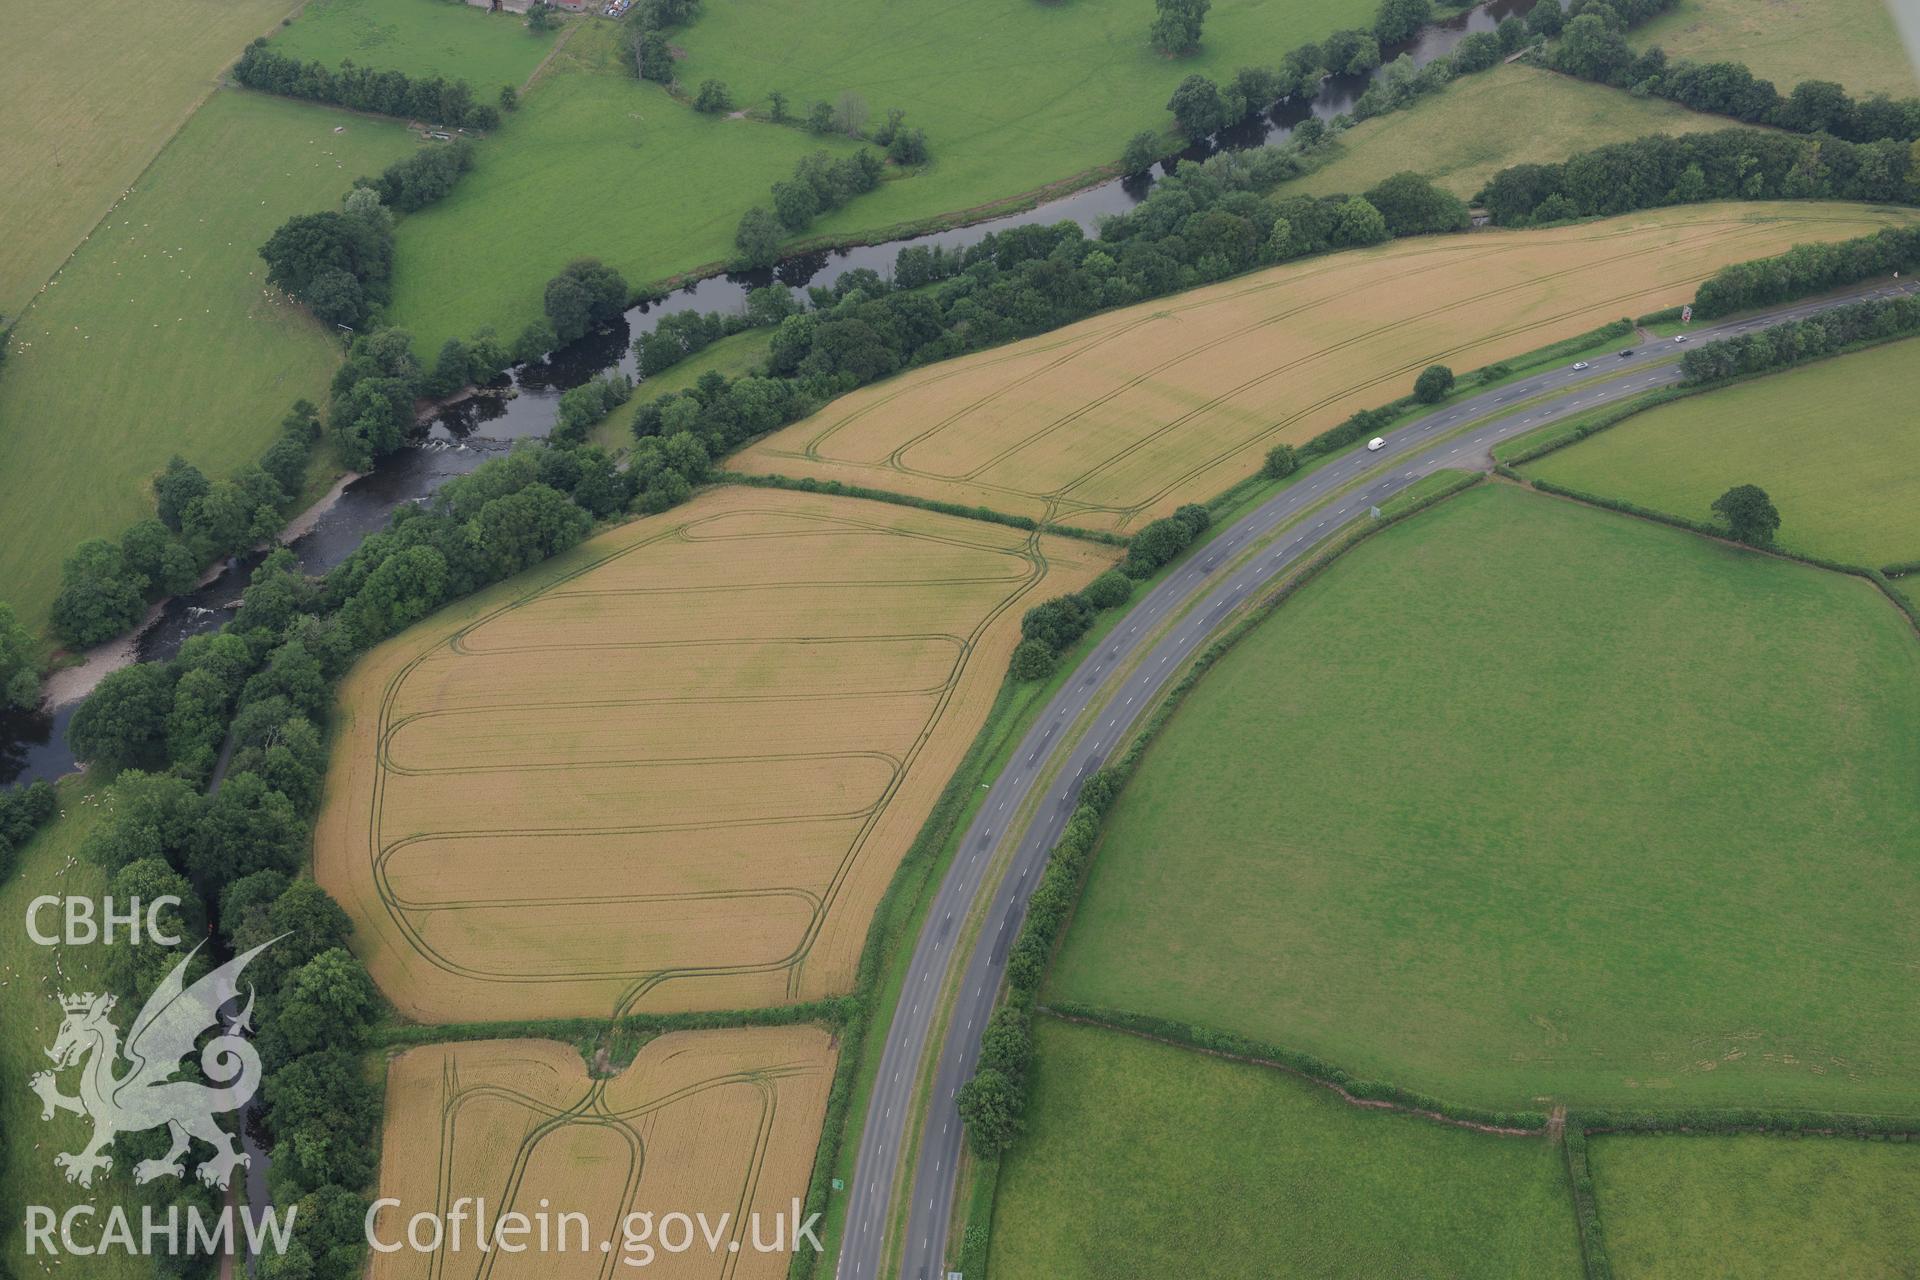 Cefn-brynich Roman fort, general view of cropmarks from east, taken by RCAHMW 1st August 2013.